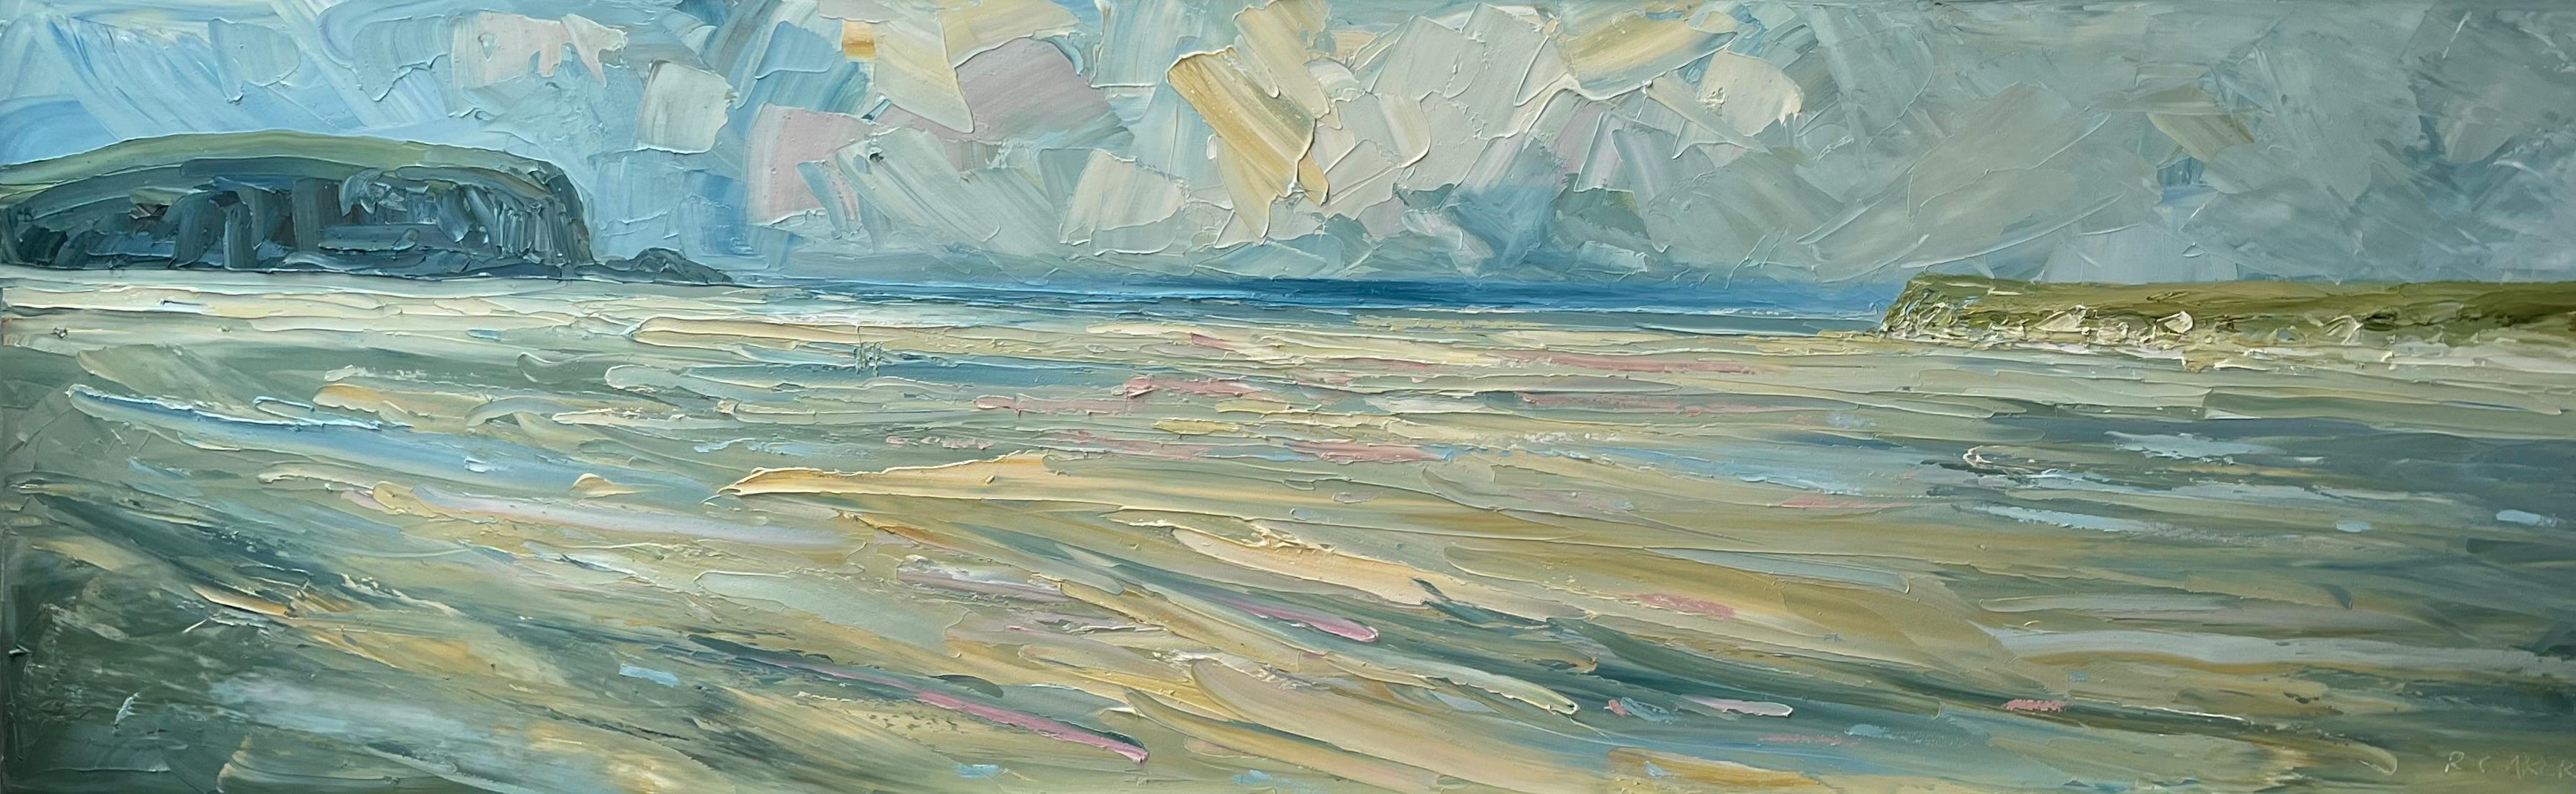 Rupert Aker Abstract Painting - Daymer Bay, Original painting, Landscape, Seascape, Abstract, Beach, Cornwall